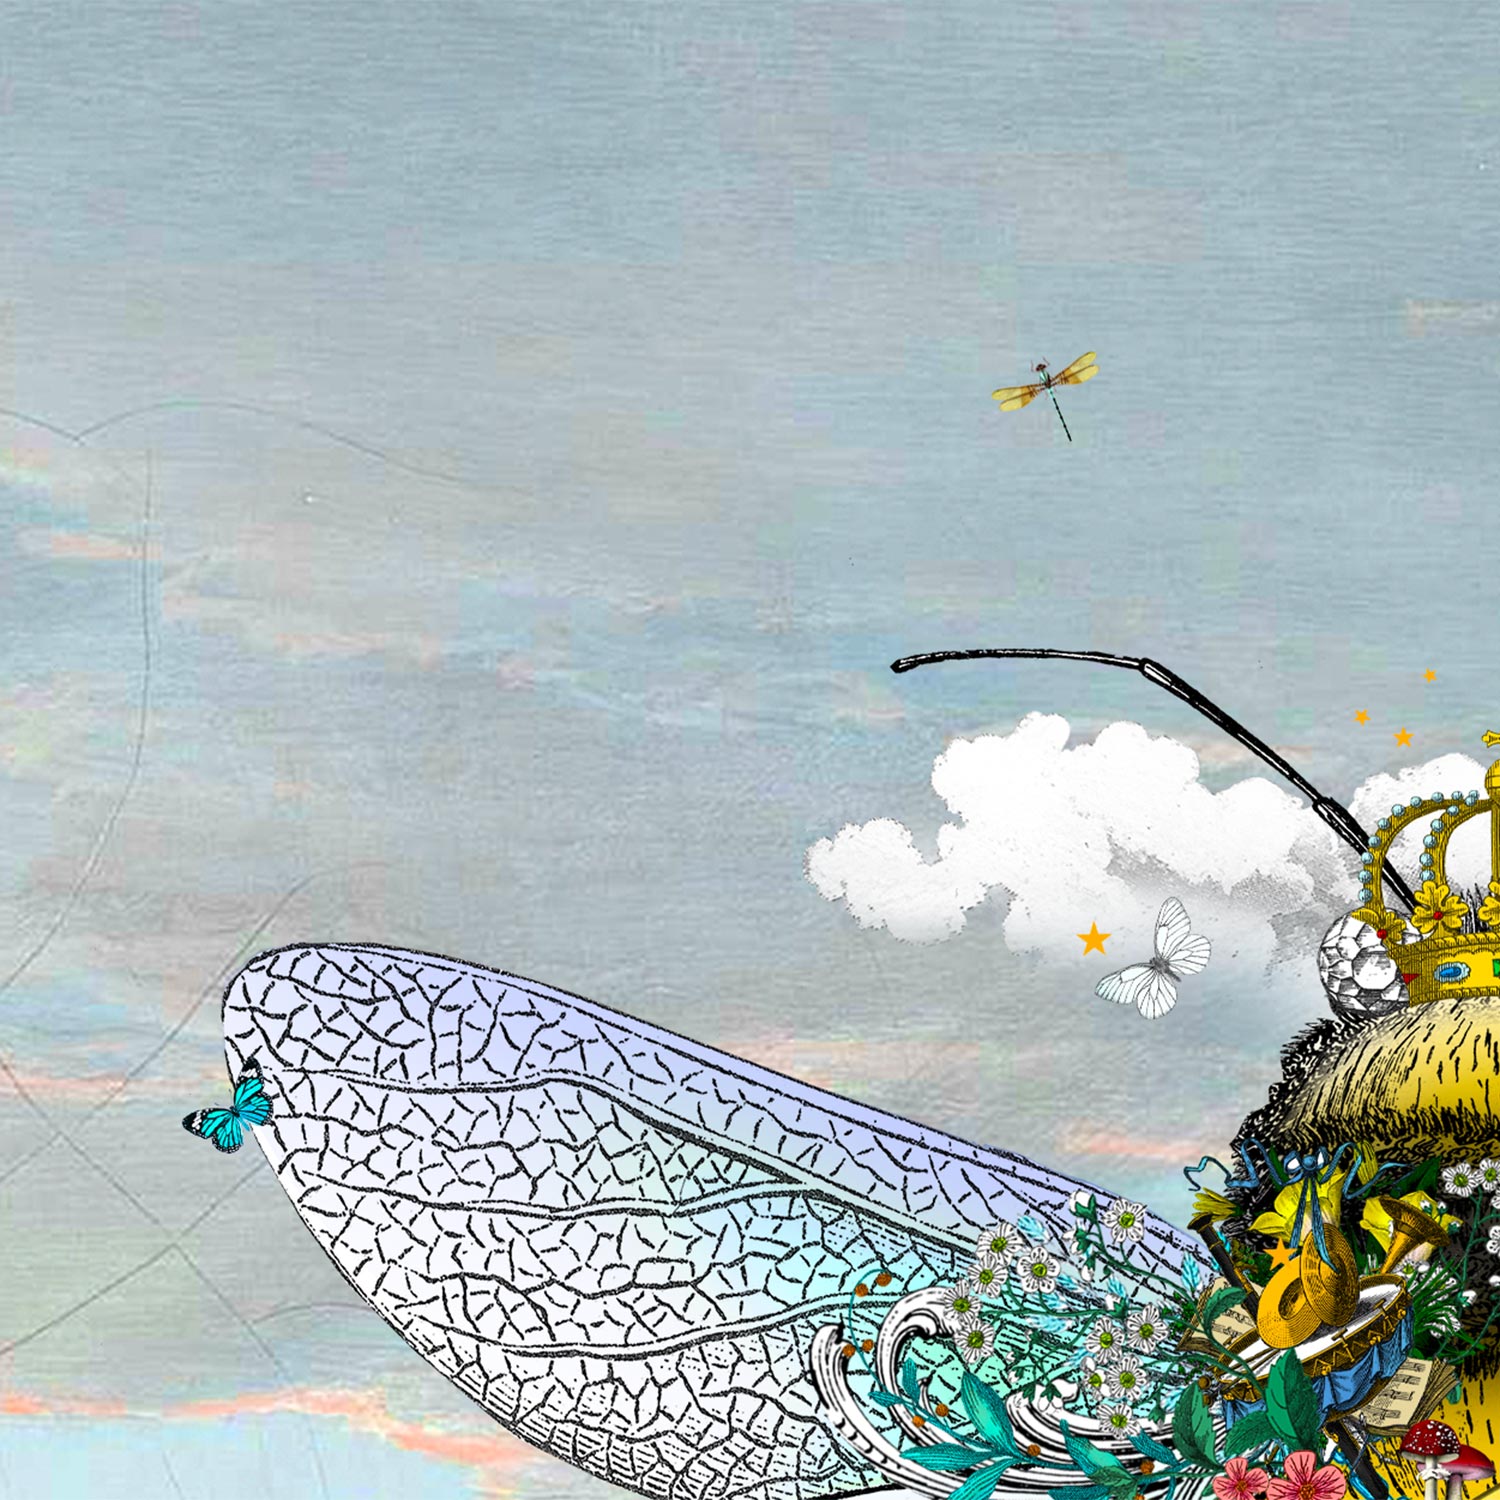 cool sky queen bee limited edition print yellow and black bumble bee wearing a crown surrounded by butterflies dragonflies birds and flowers on a blue peach sunset calm sky by artist kristjana williams 